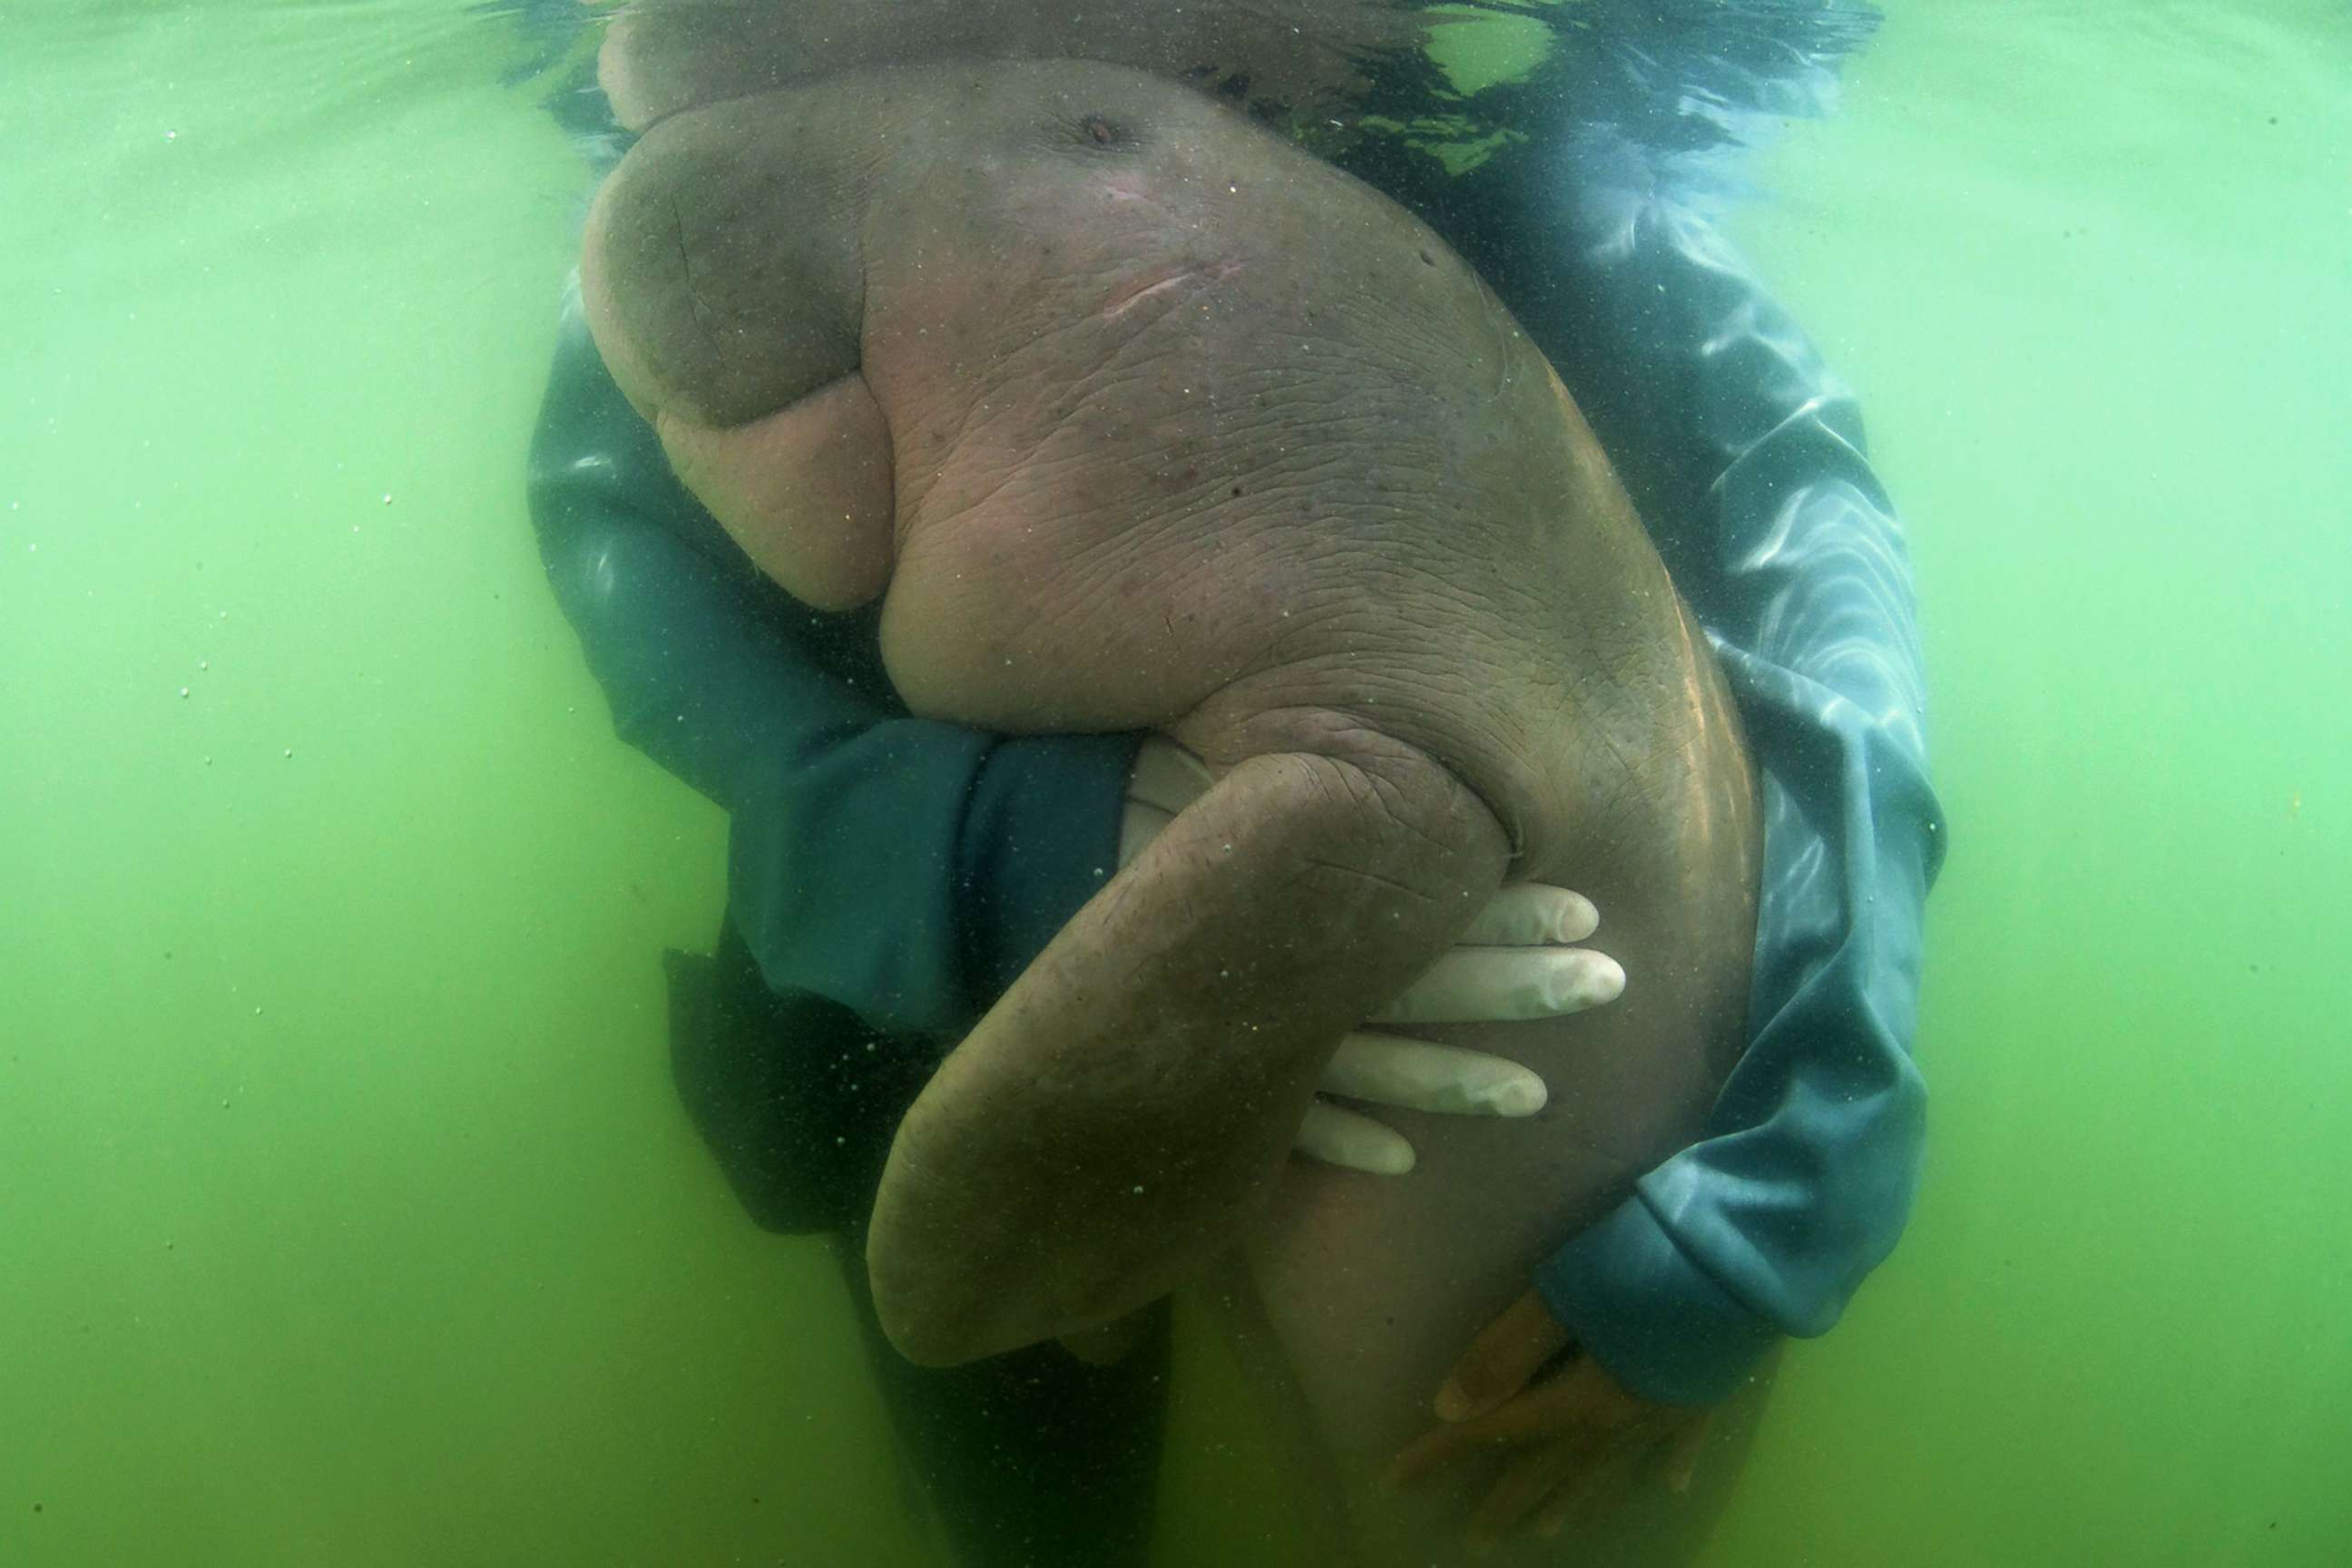 PHOTO: Mariam the dugong is cared for by park officials and veterinarians from the Phuket Marine Biological Centre on Libong island in this photo released July 3, 2019. The orphaned baby dugong was rescued off a beach in Krabi Province, Thailand.